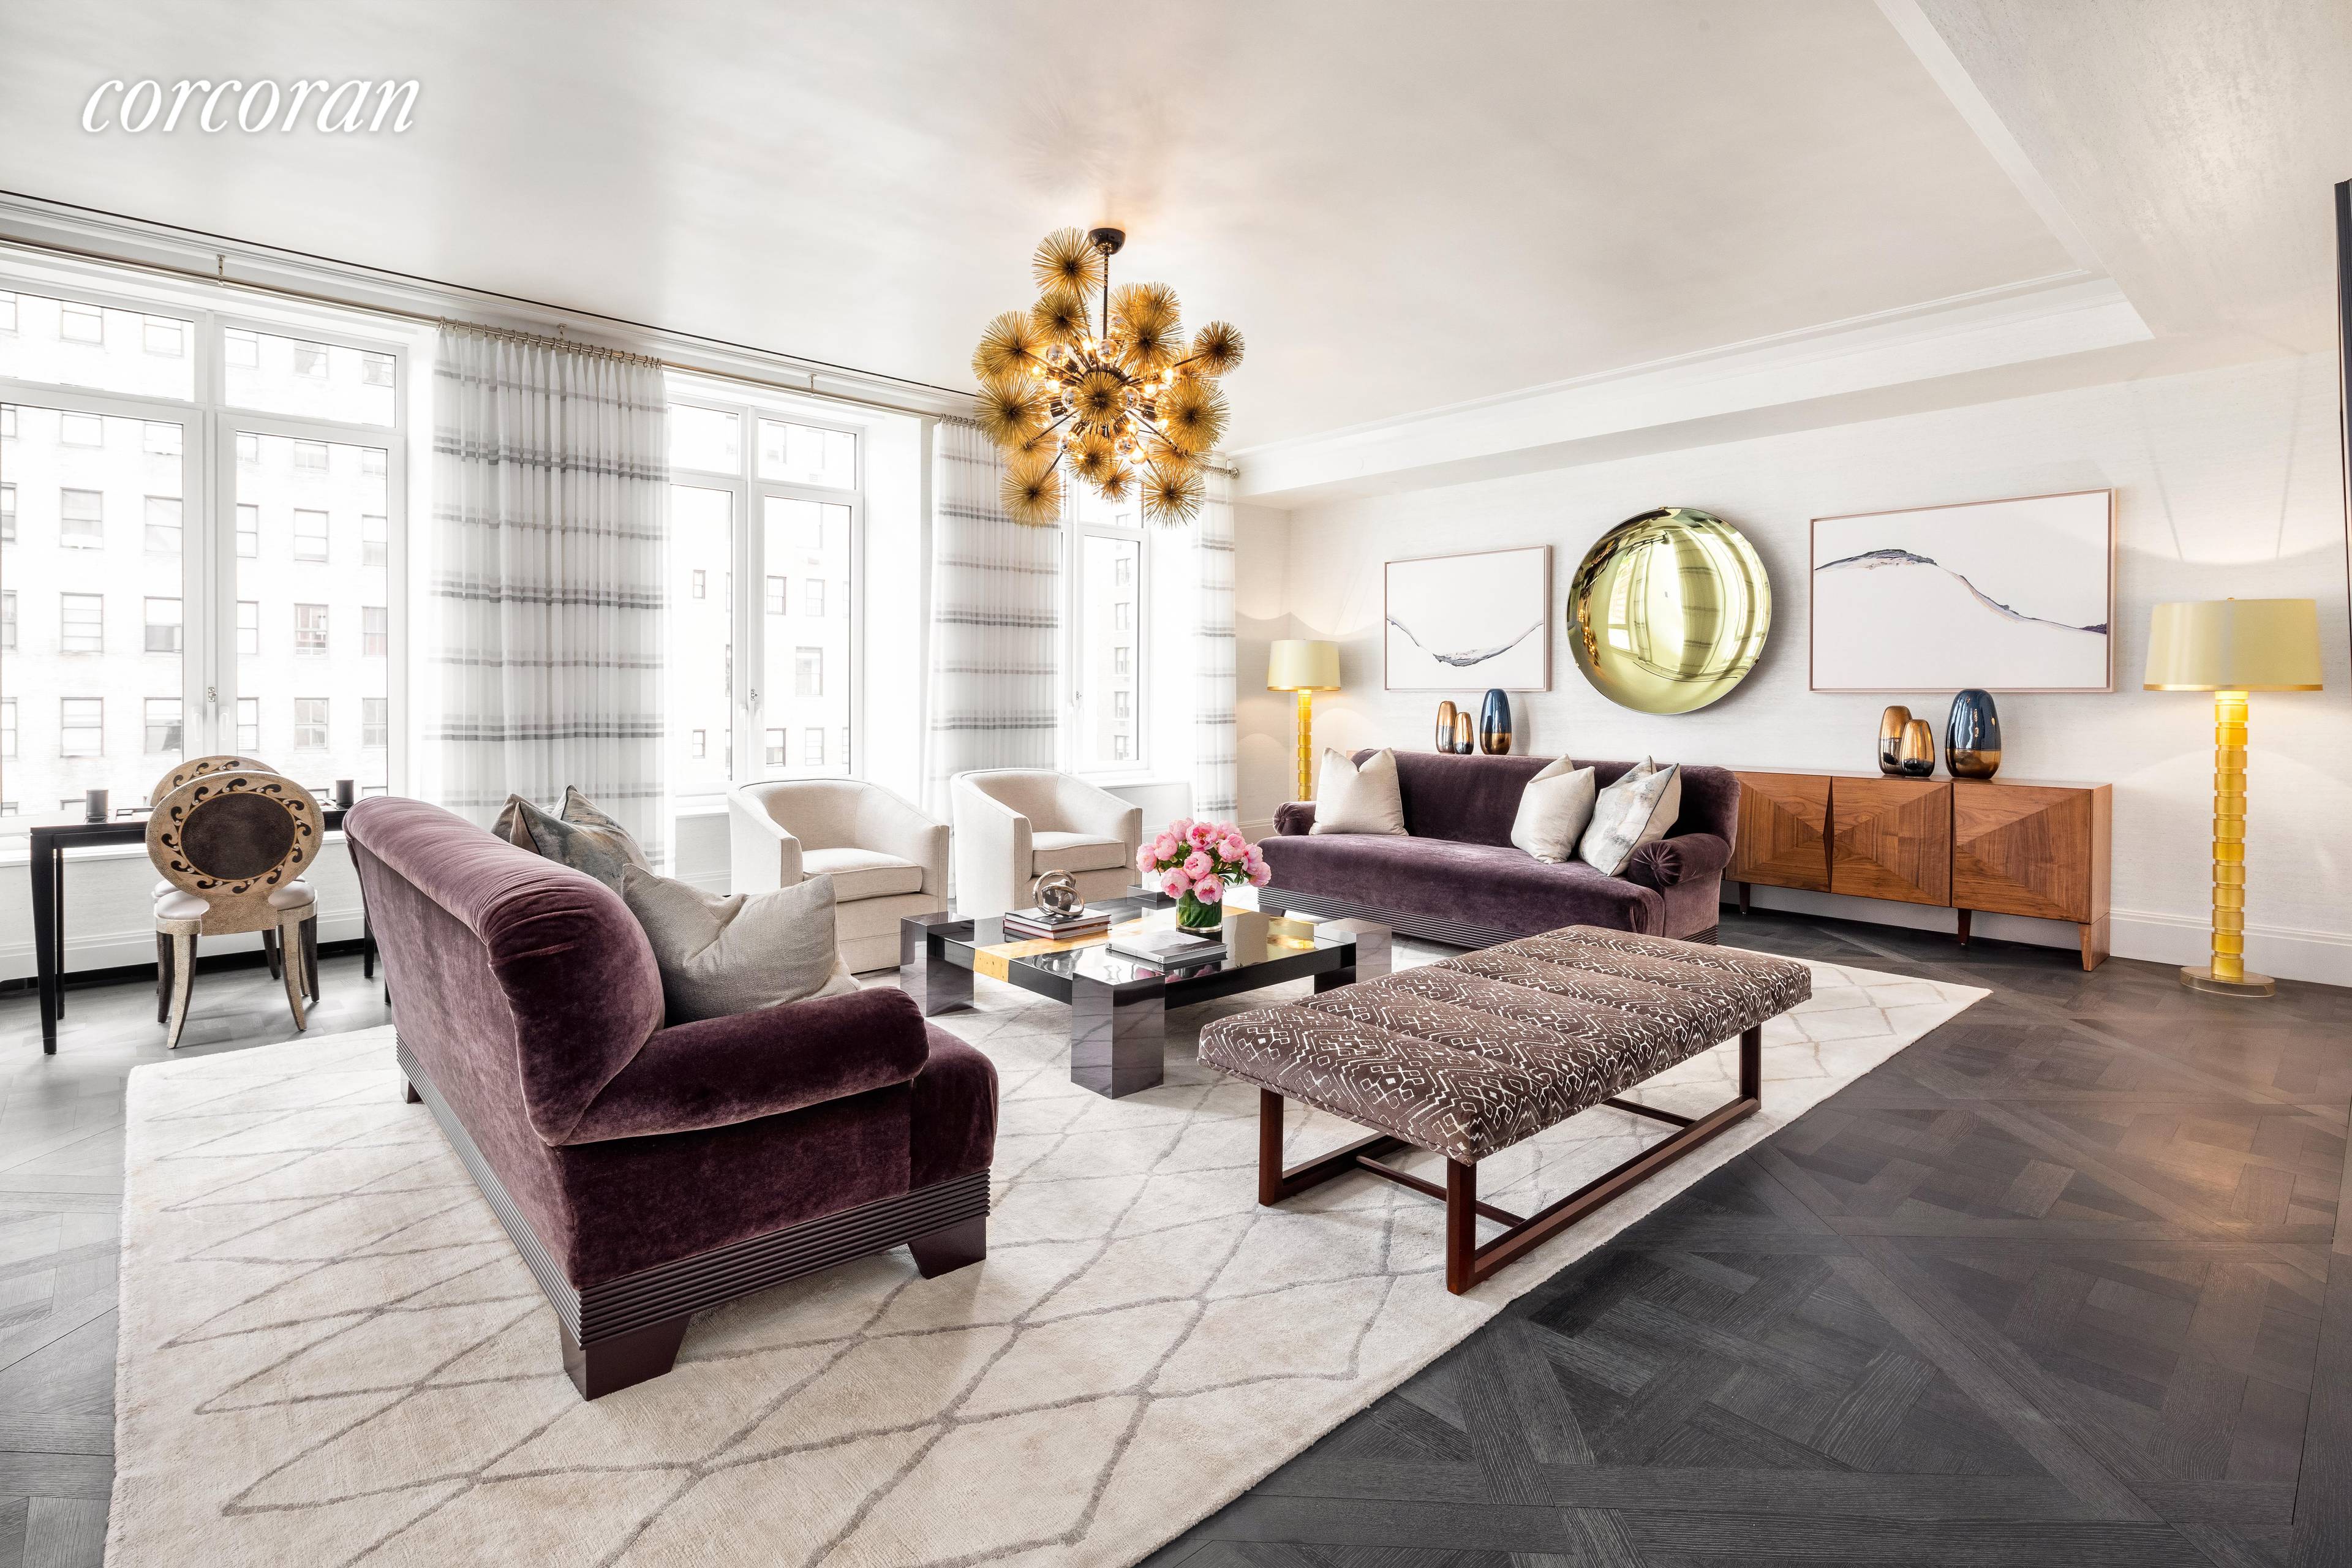 Introducing the 6th floor at 1010 Park Avenue, one of New York's most distinguished new addresses and finest boutique condominiums developed by The Extell Development Company.